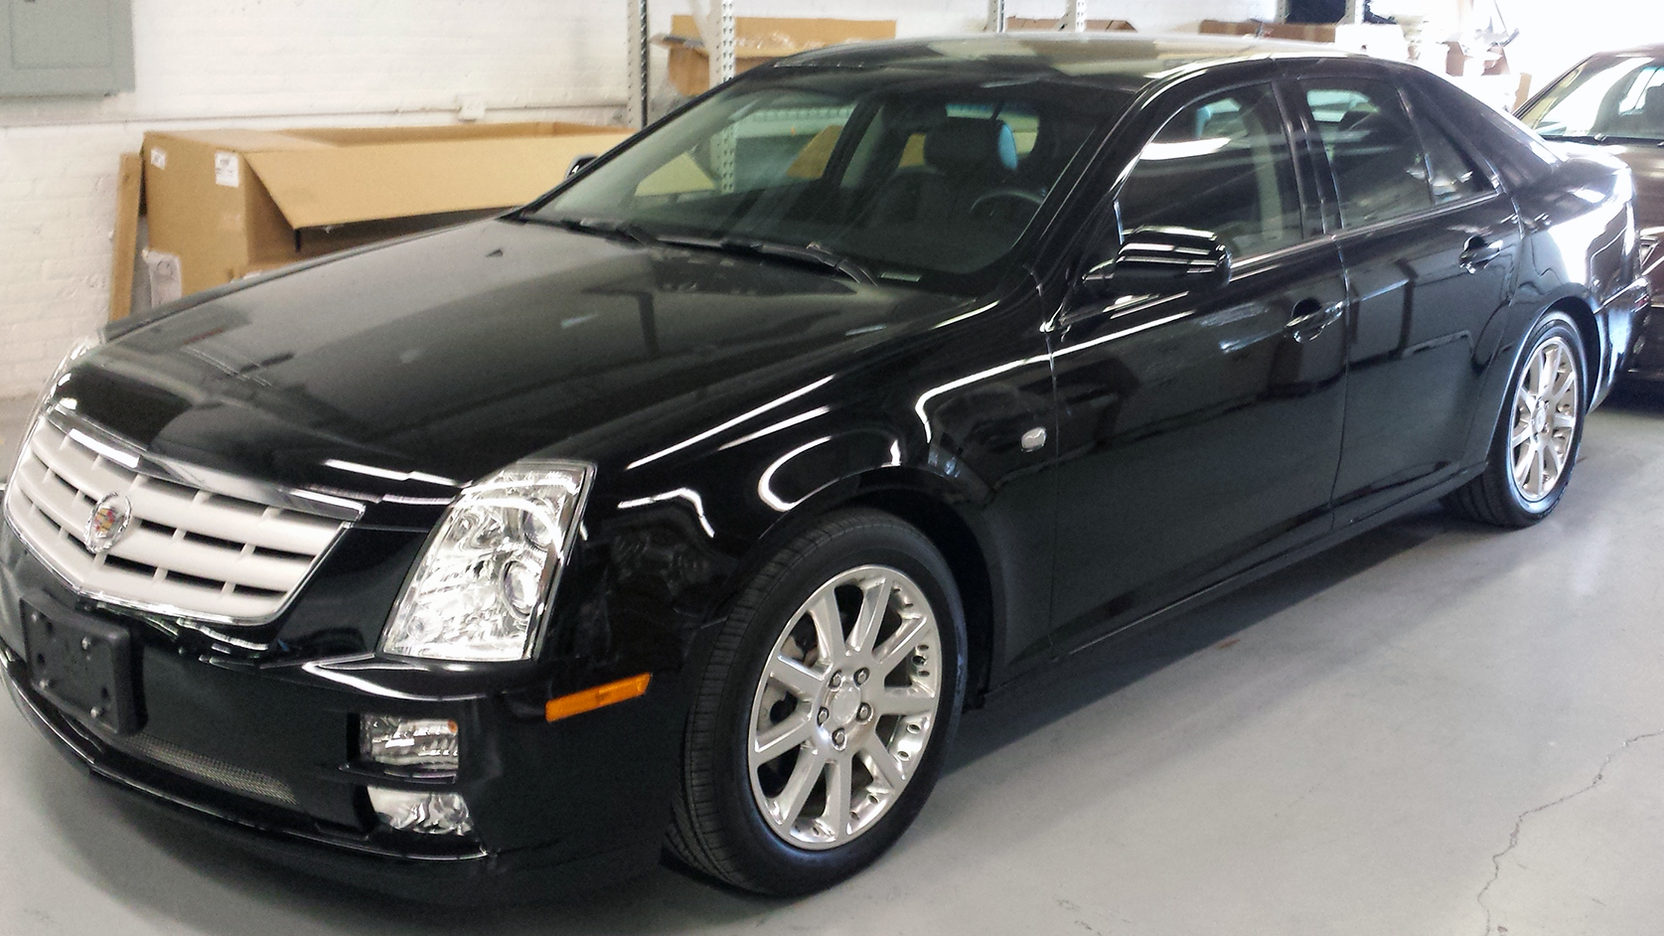 2005 Cadillac STS | T168 | Chicago 2016